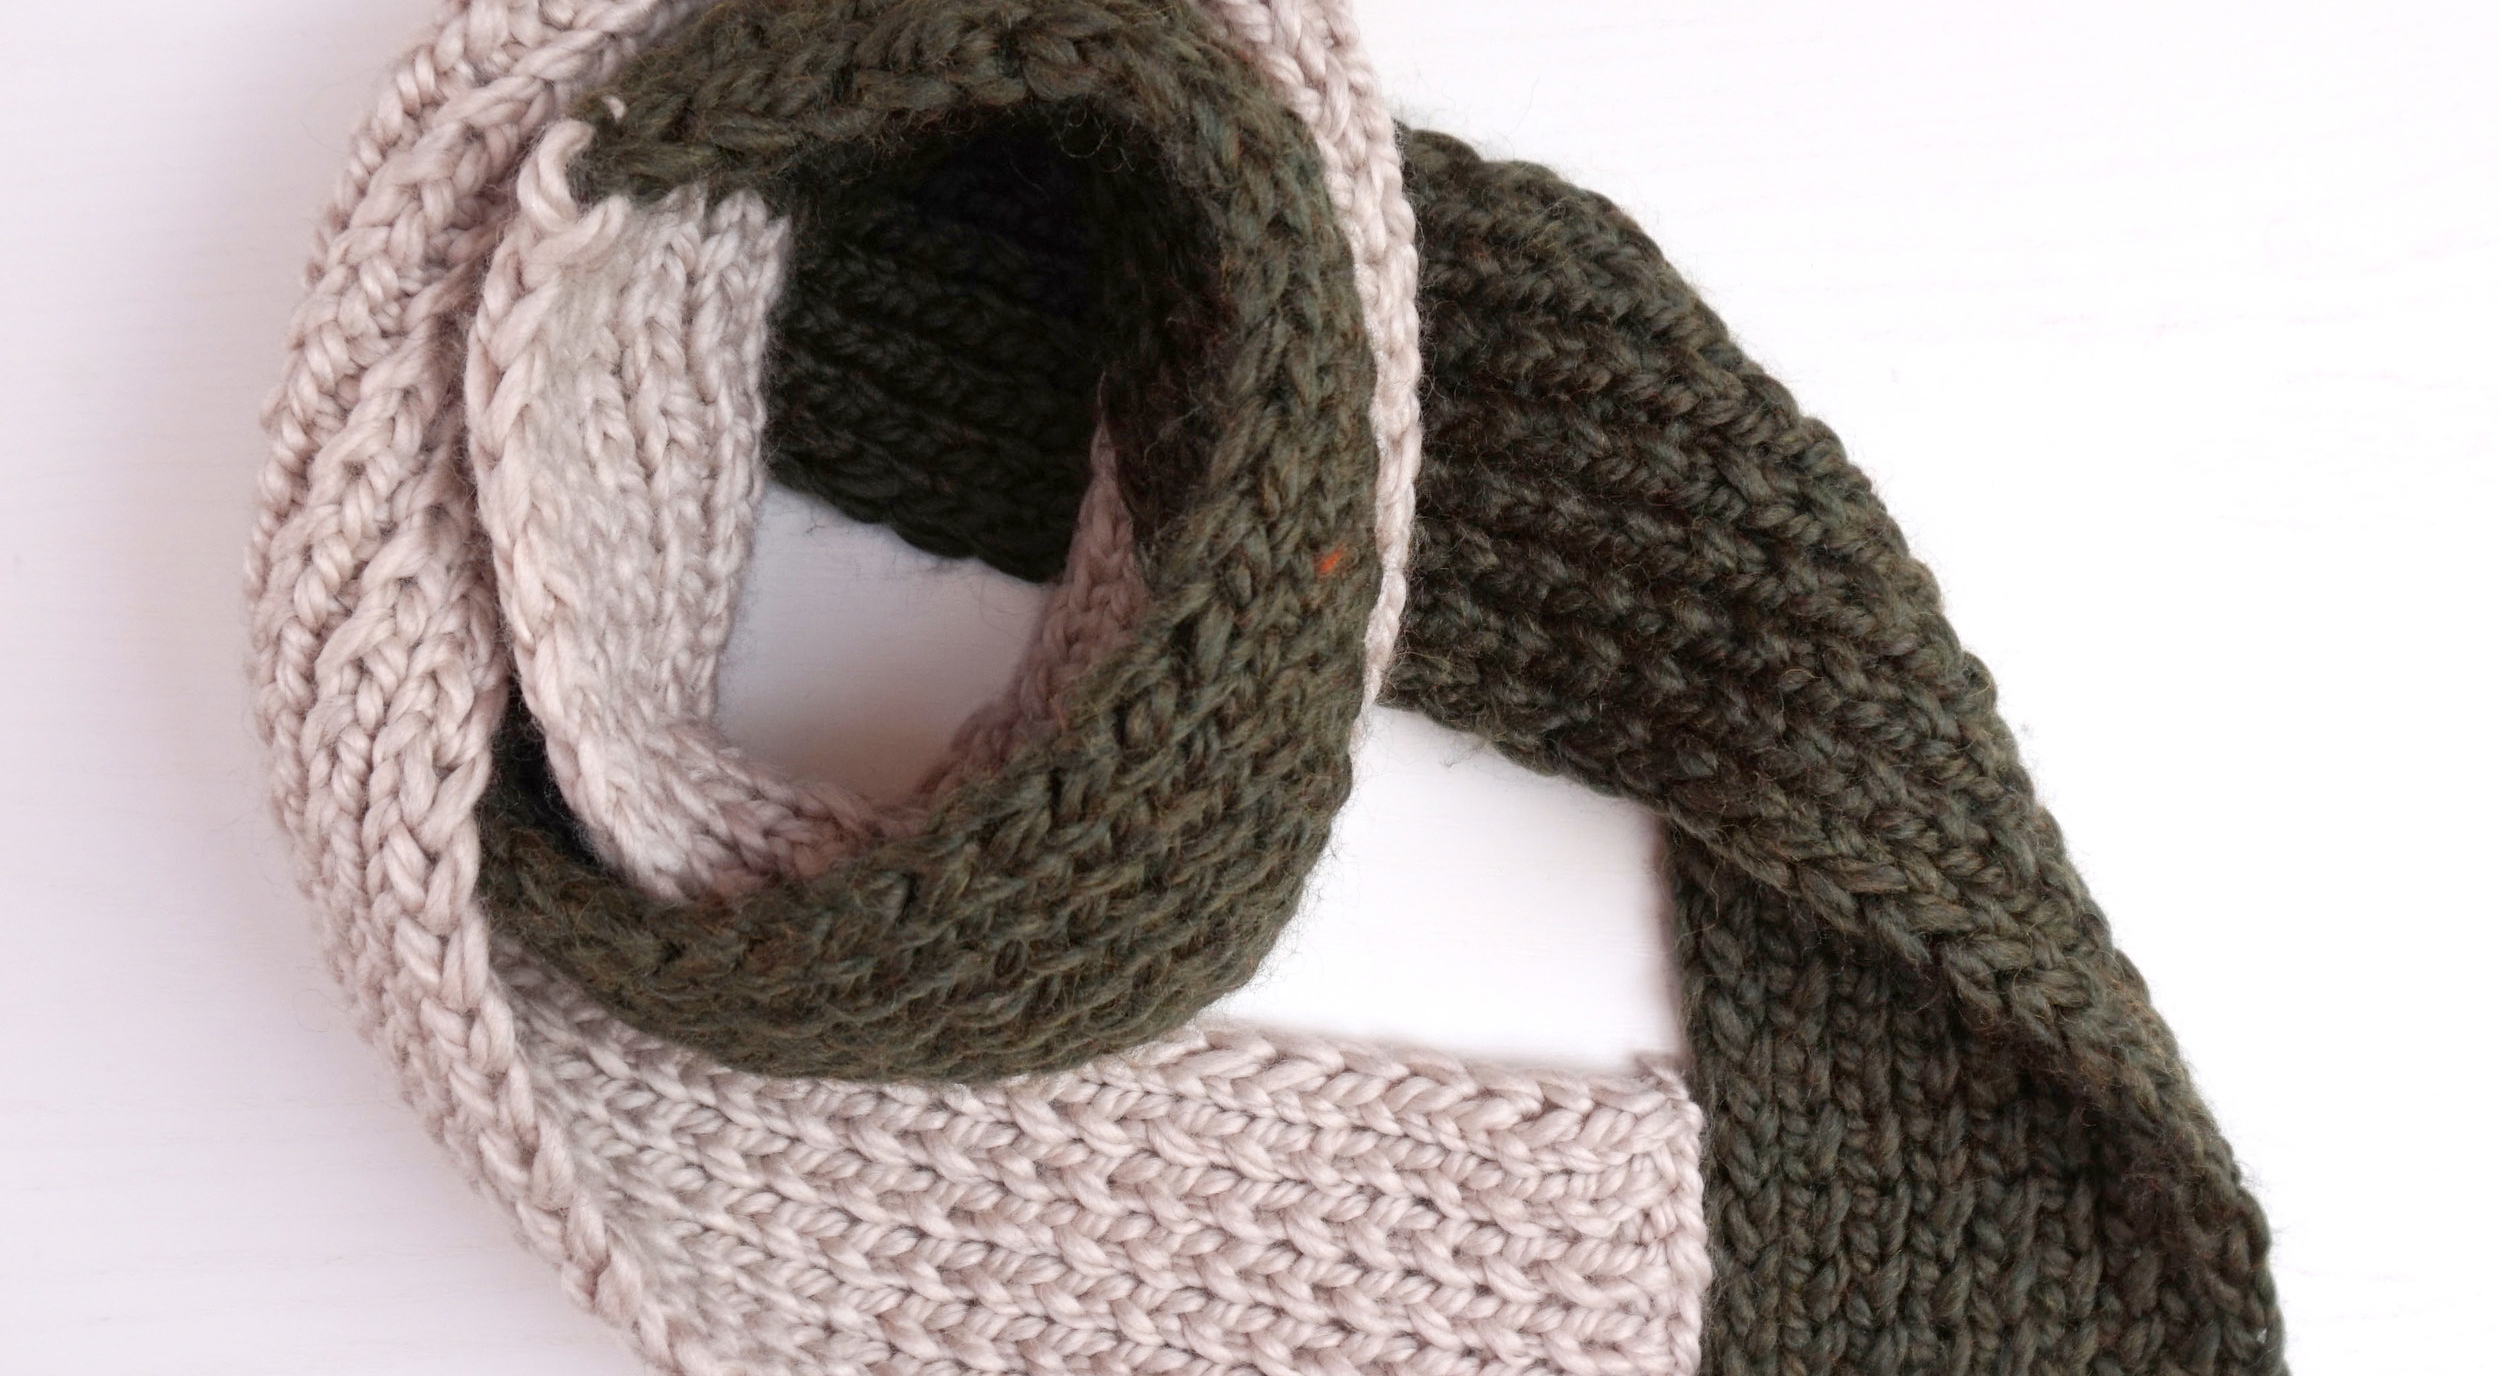 Knitted Scarf - We’ve gathered here 21 cozy scarf knitting patterns that you can knit quickly, just in time for fall and impending winter. #ScarfKnittingPatterns #KnittingPatterns #ScarfPatterns